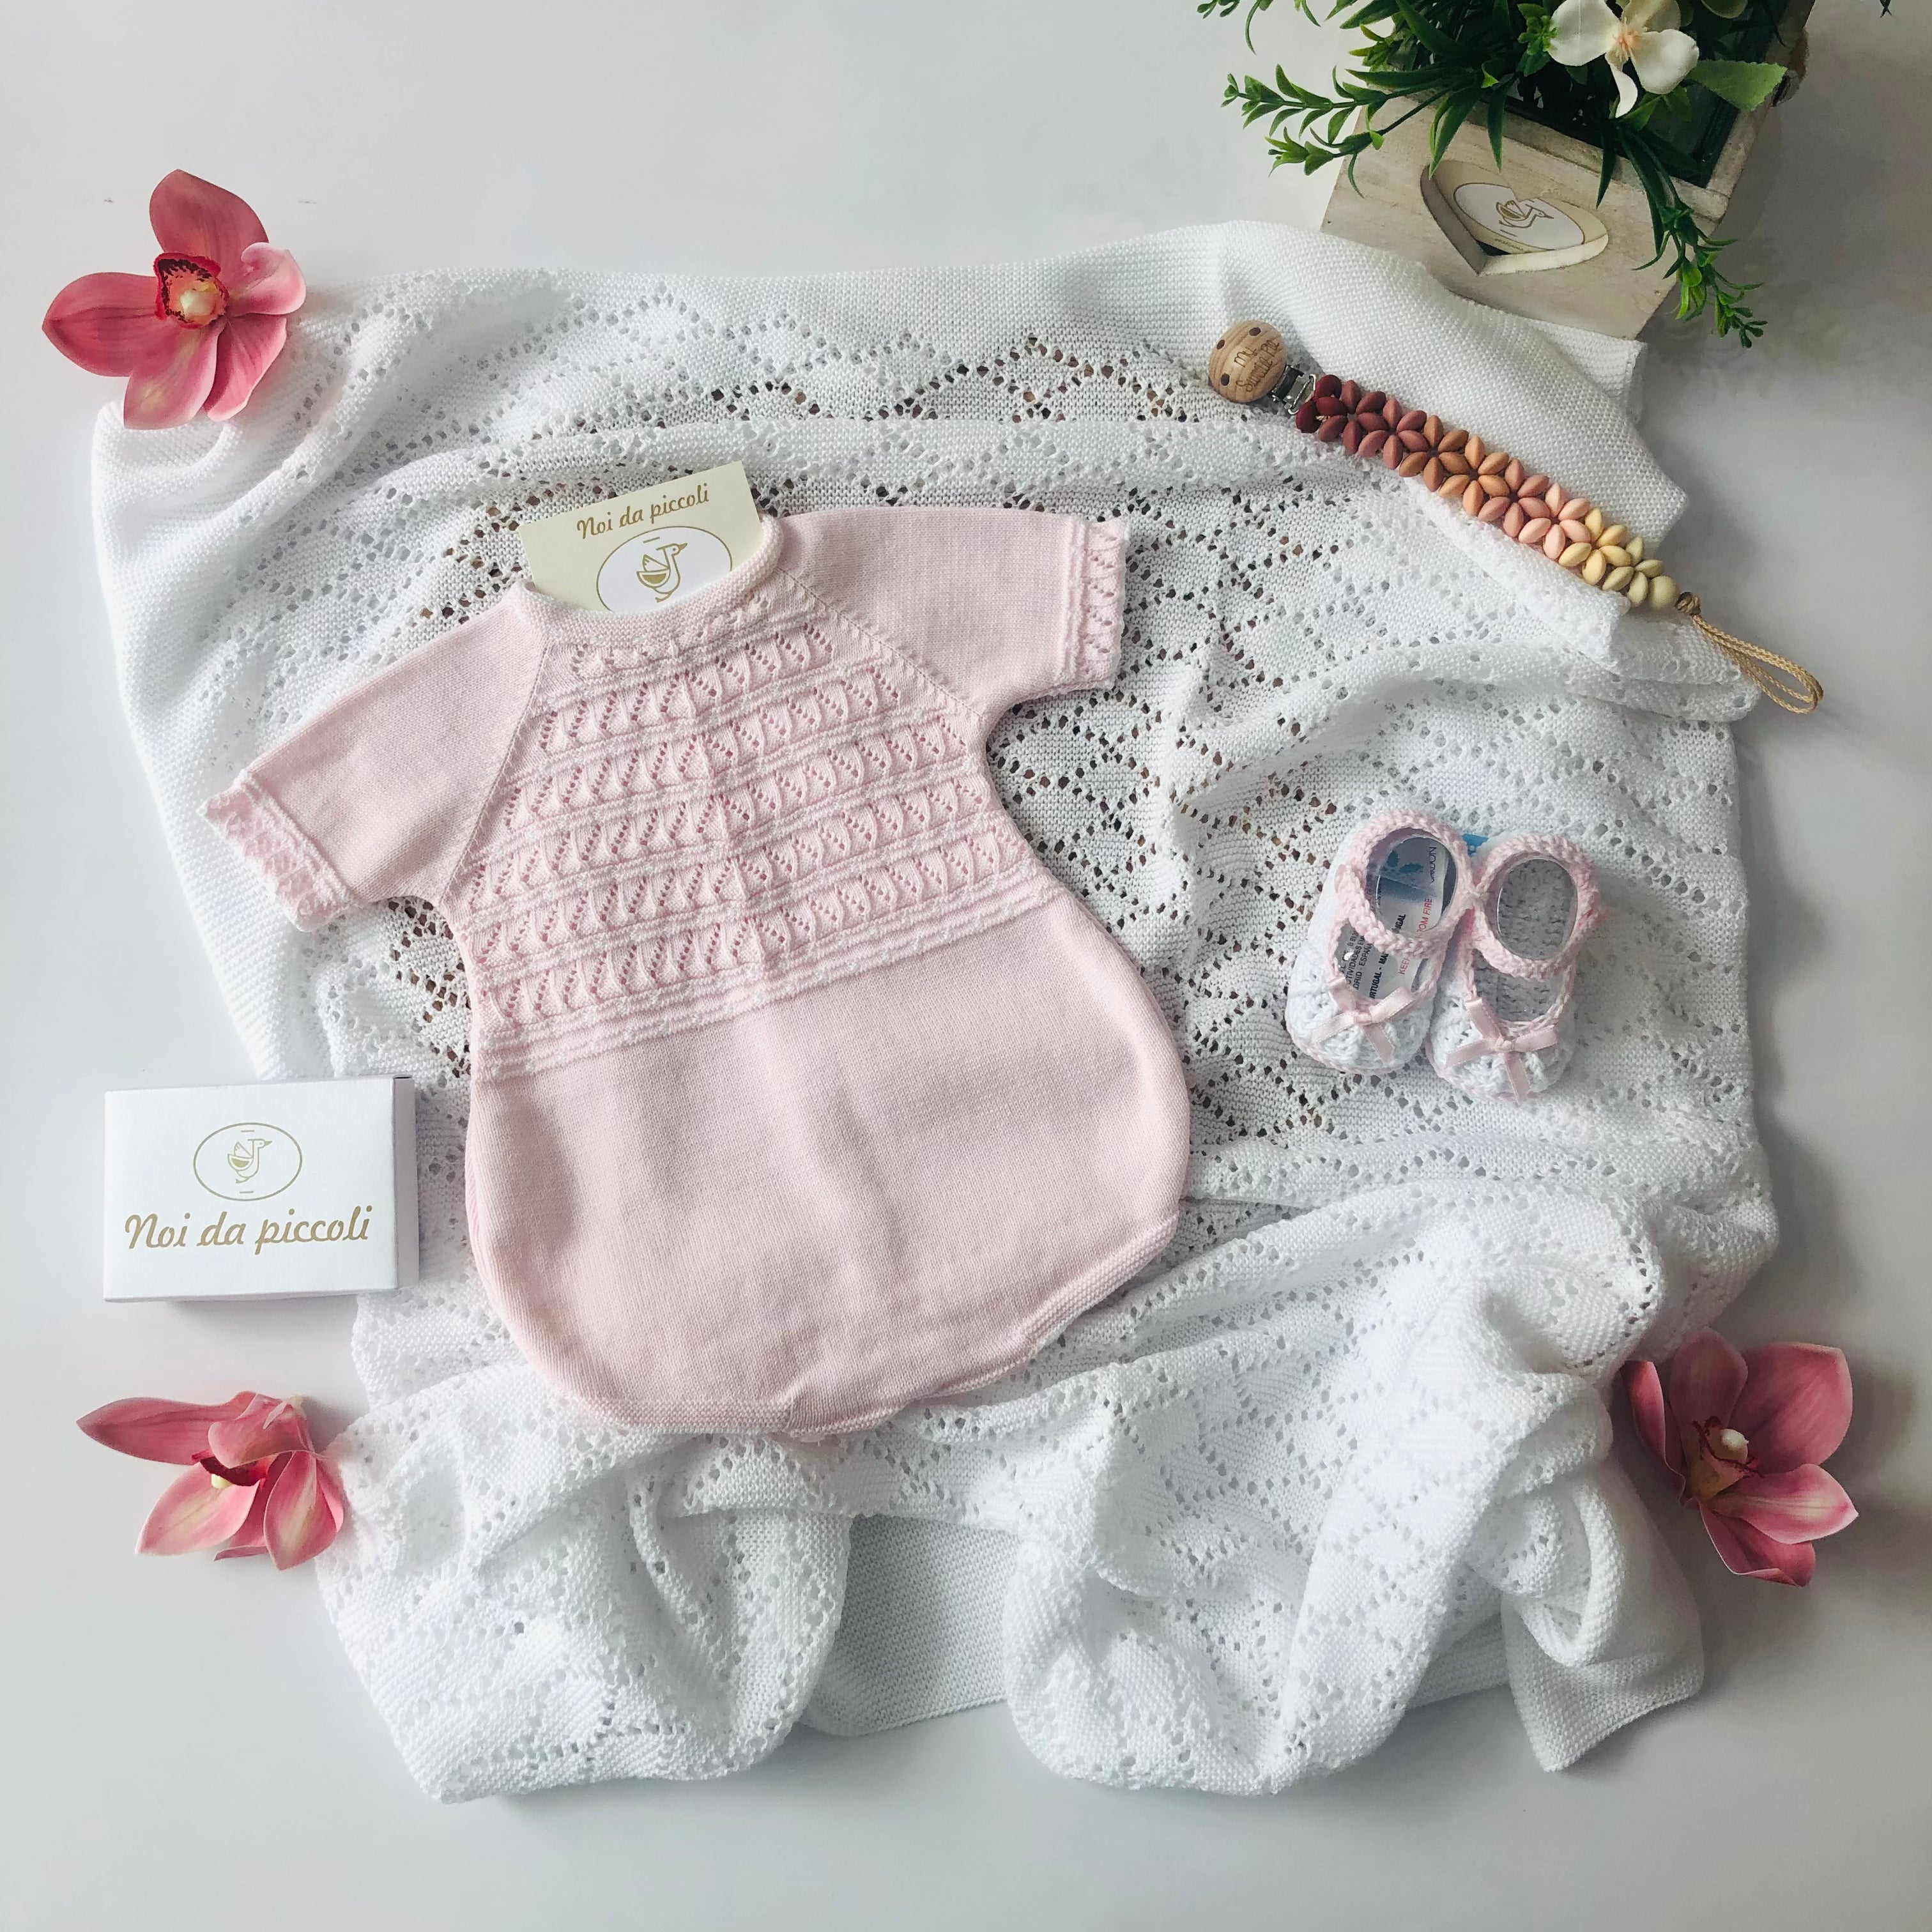 PINK ROMPER WITH COTTON THREAD COVER